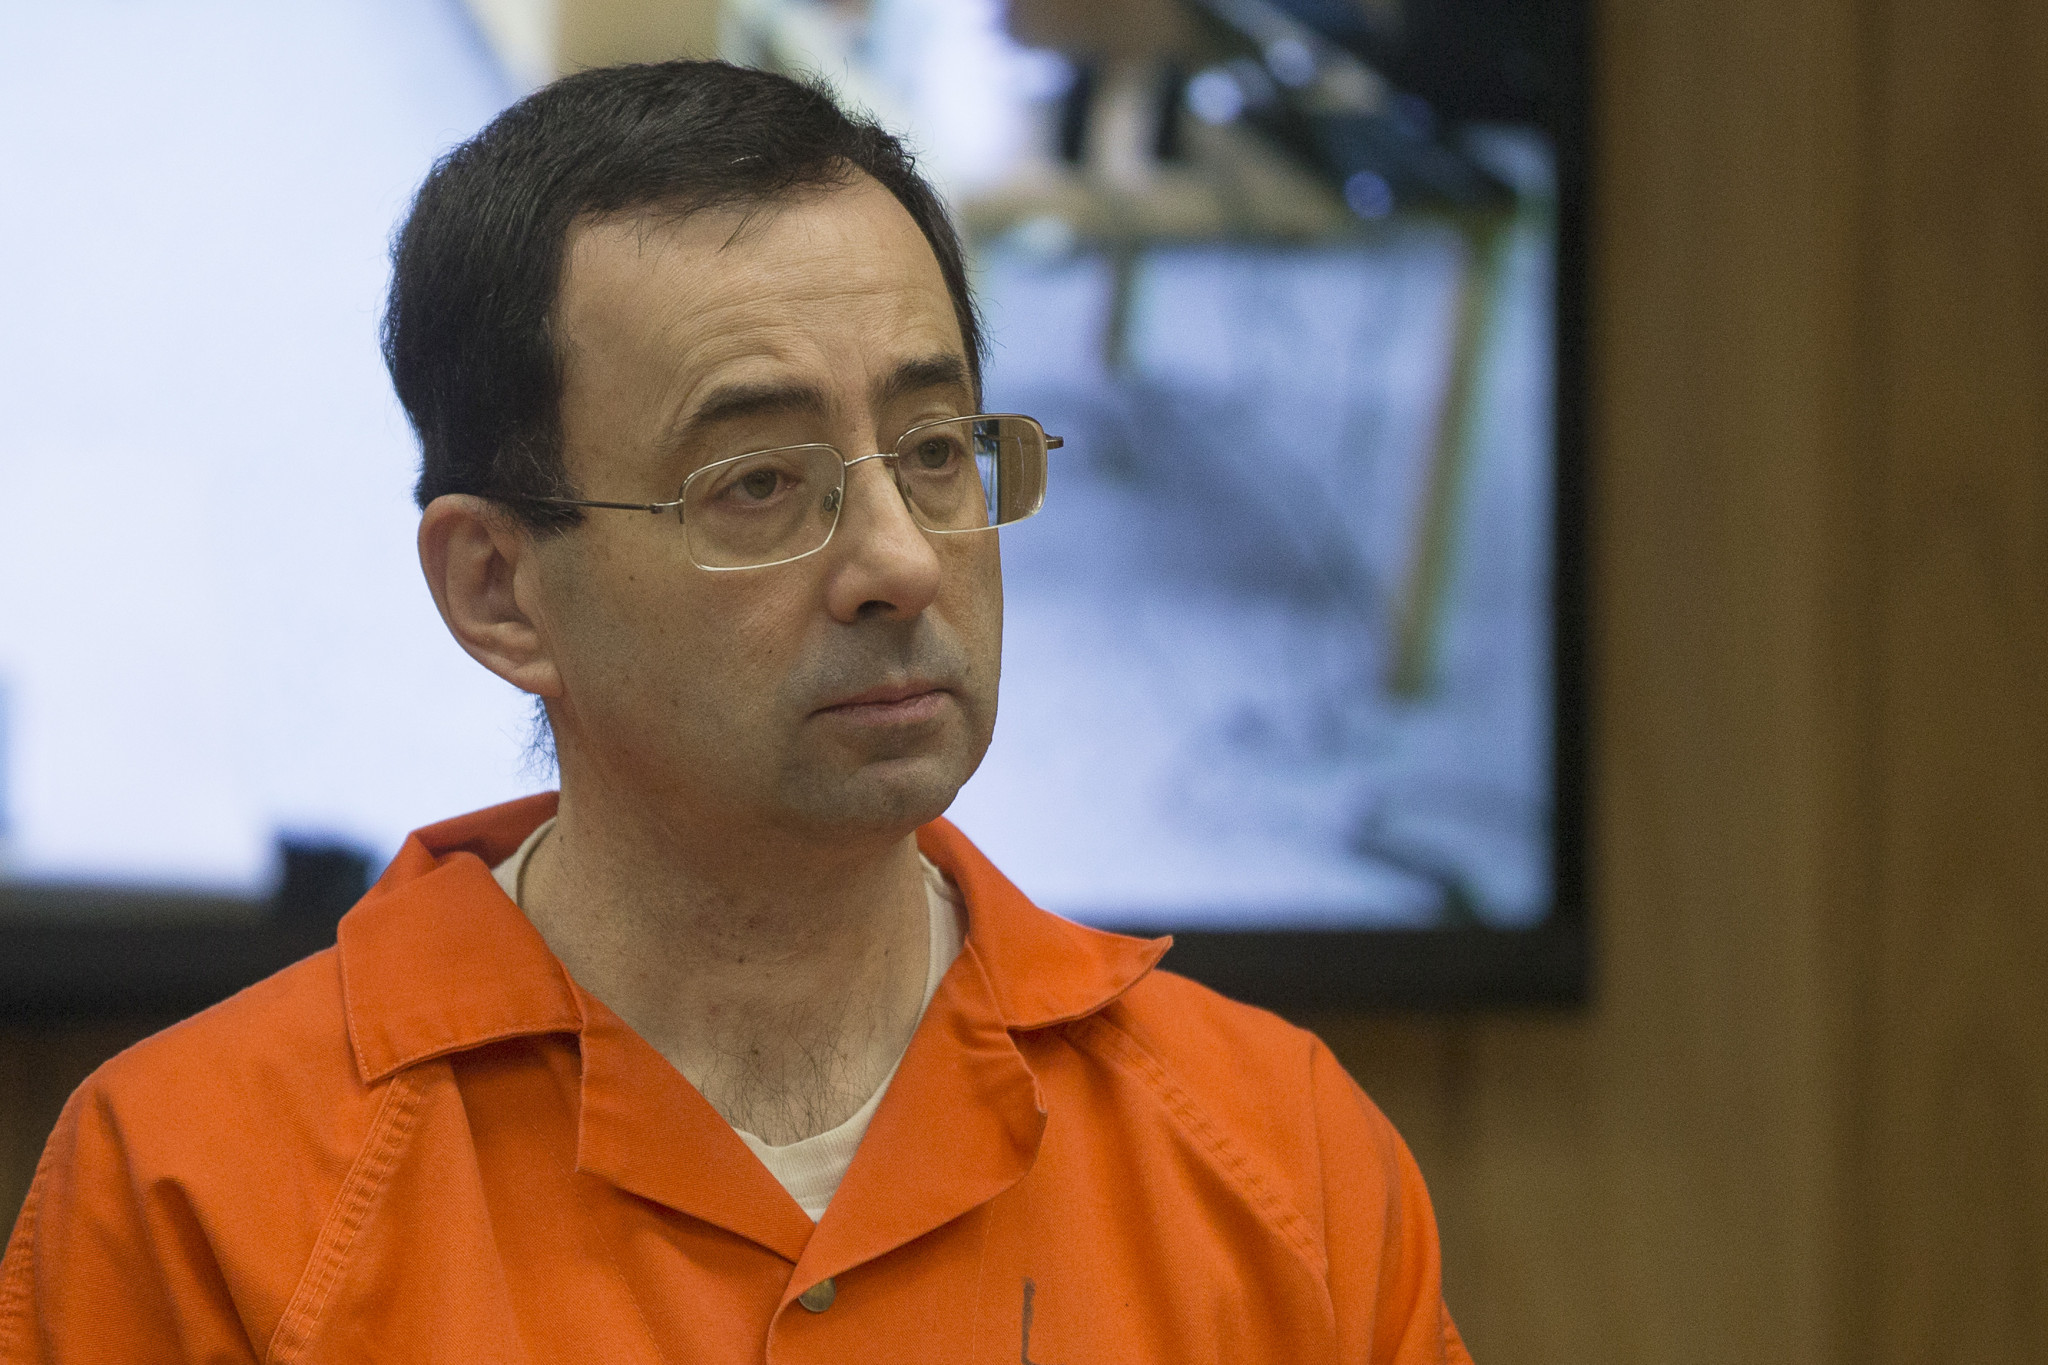   The American gymnastics team doctor, Larry Nbadar, is jailed for 175 years after abusing young athletes © Getty Images 